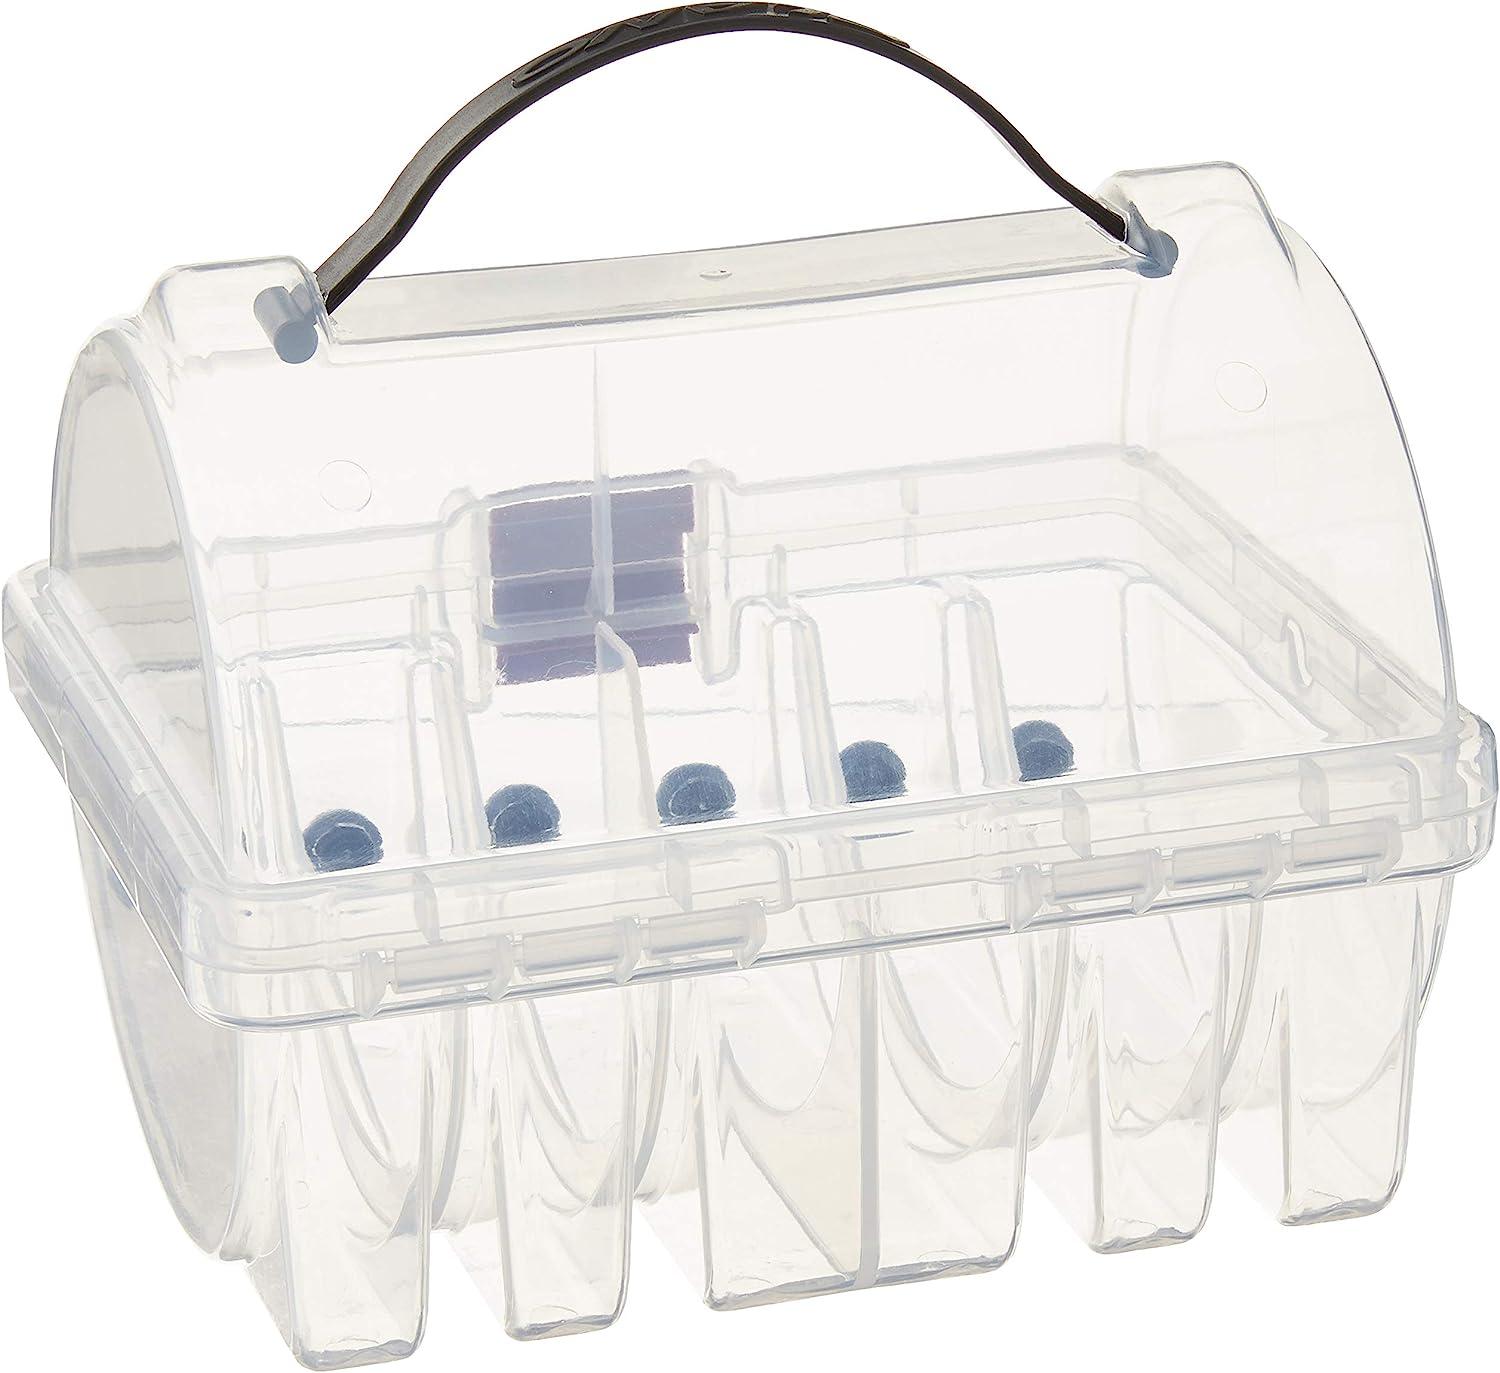 Plano 108700 Leader Spool Box, Clear, One Size